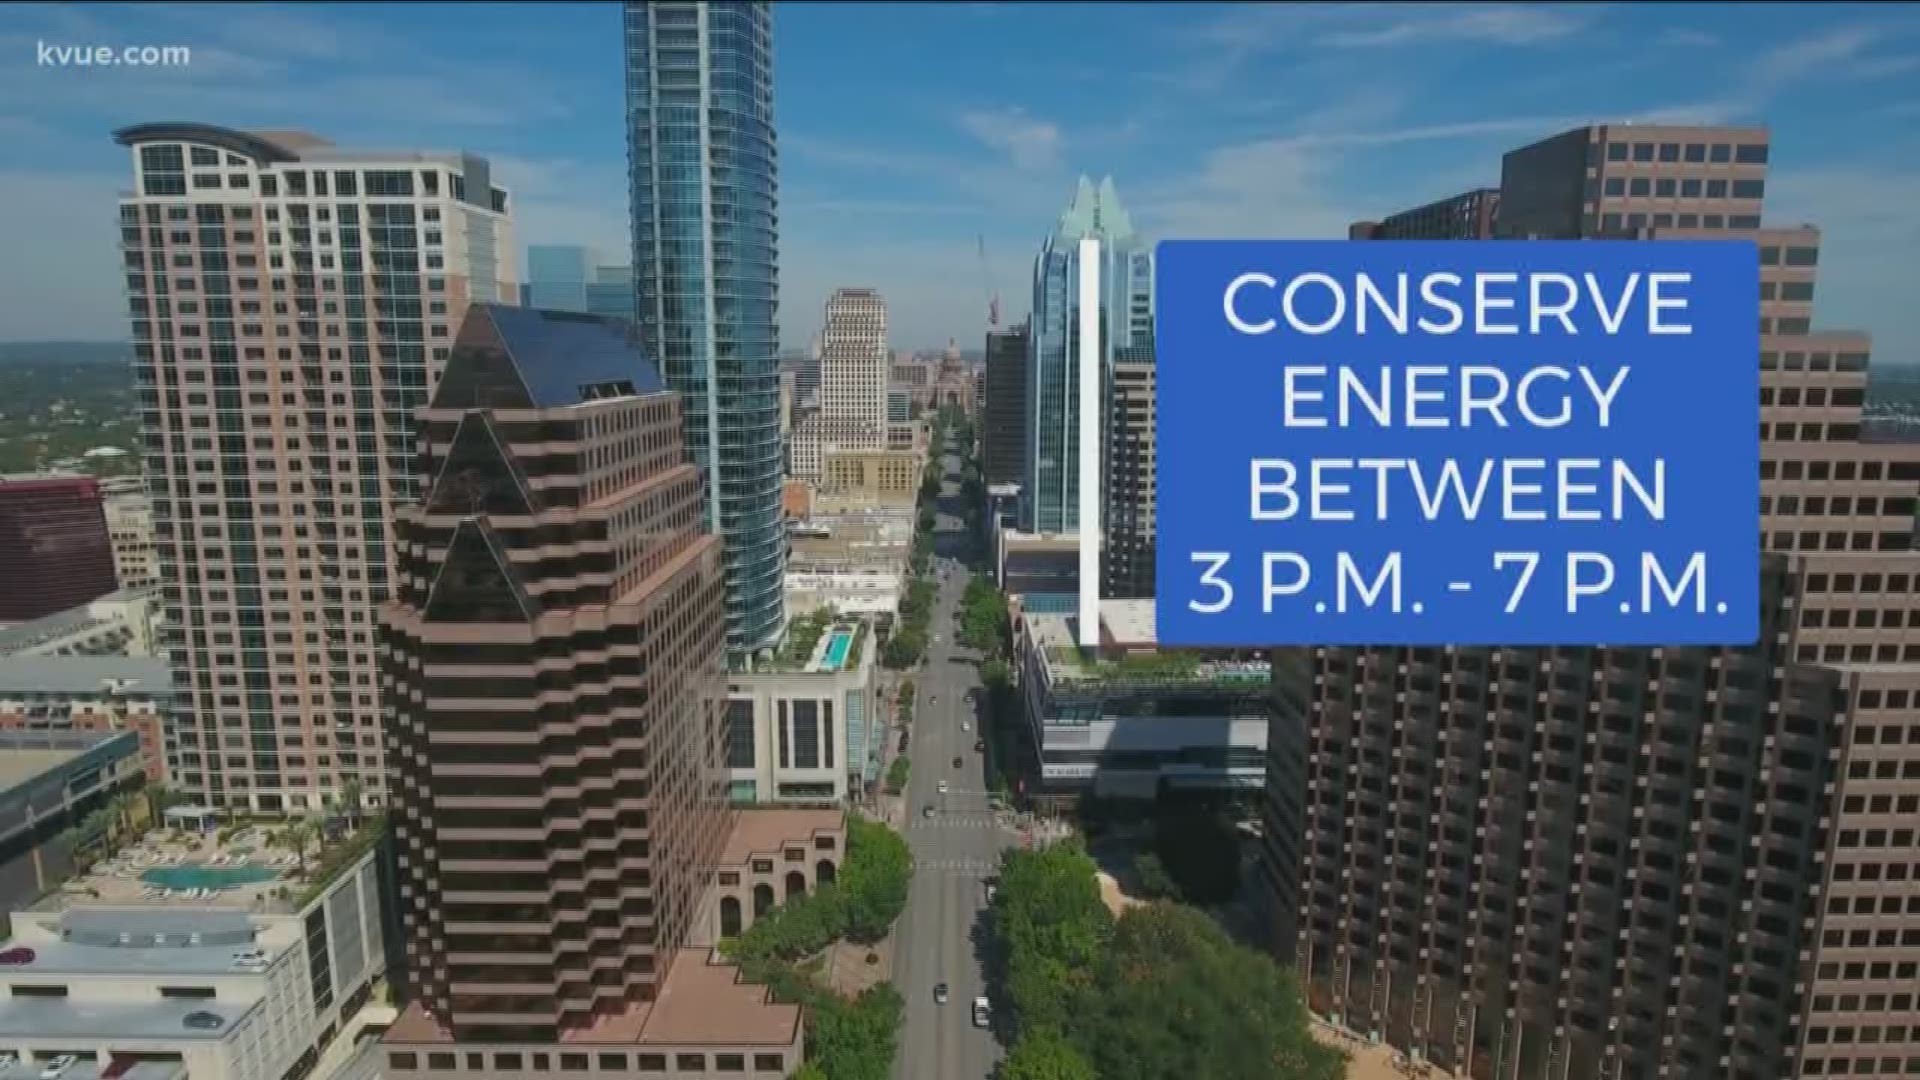 The triple-digit heat has energy officials urging Texans to use less electricity during the hottest hours of the day.